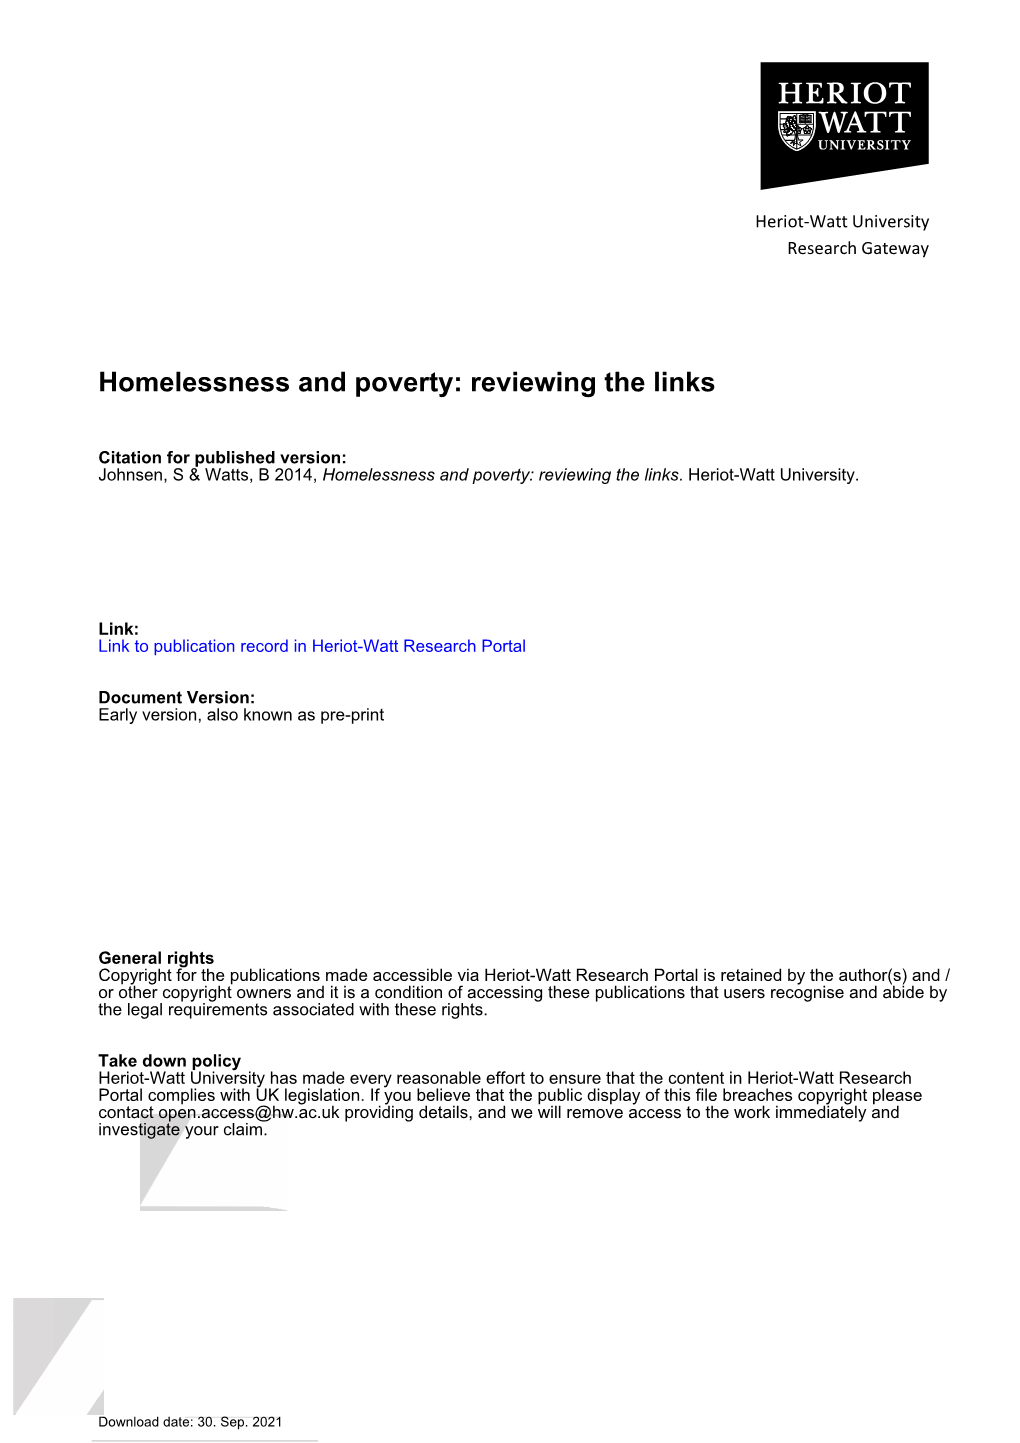 Homelessness and Poverty: Reviewing the Links